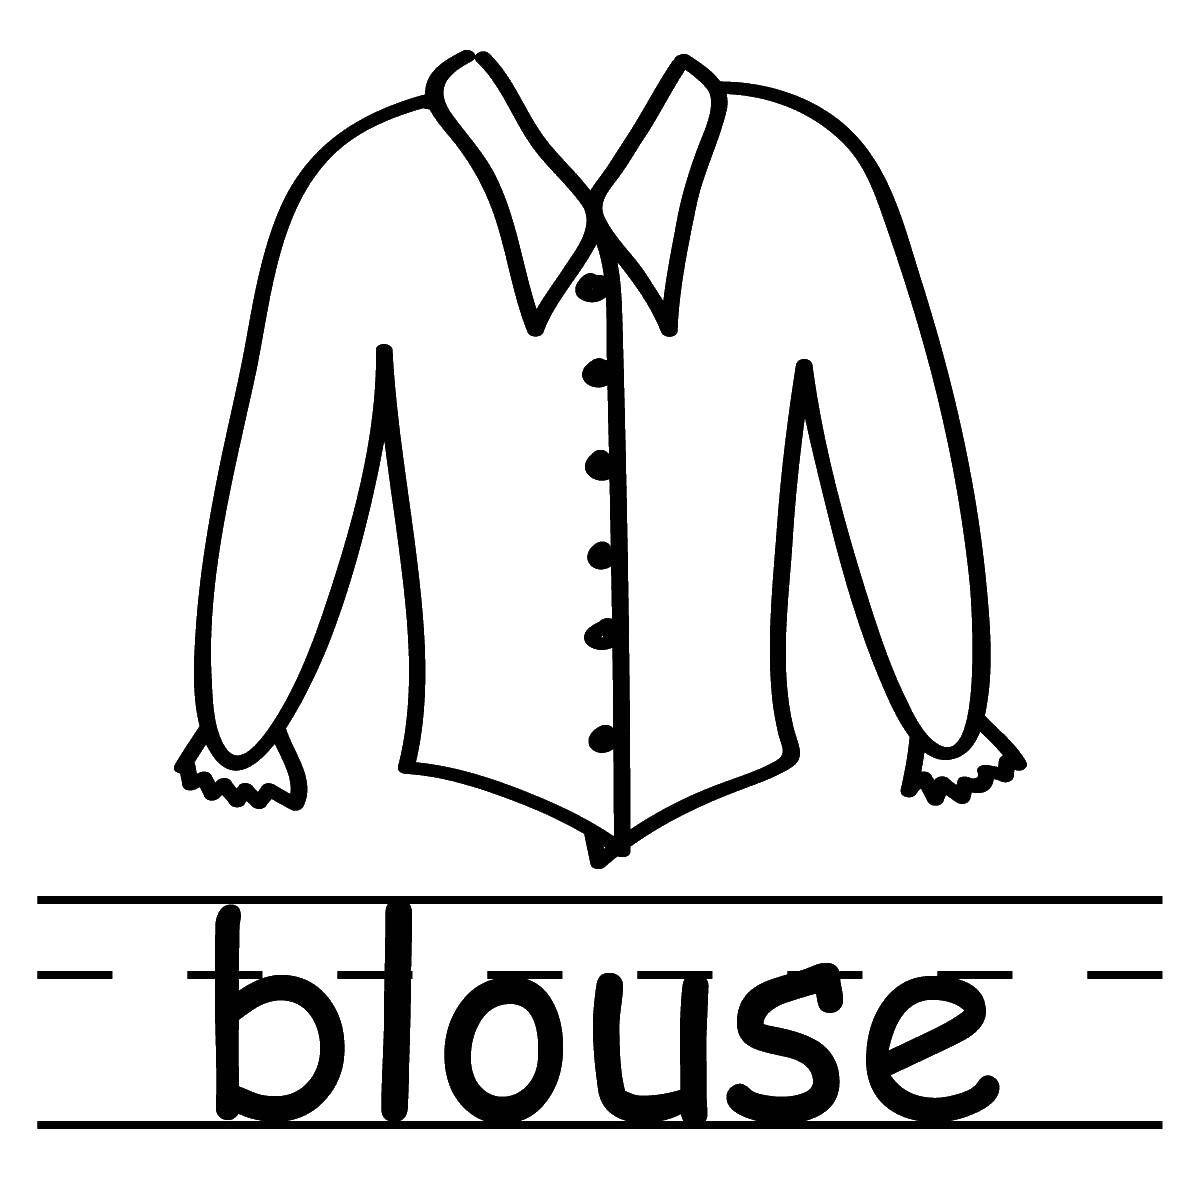 Coloring Blouse. Category Clothing. Tags:  clothing, blouse.